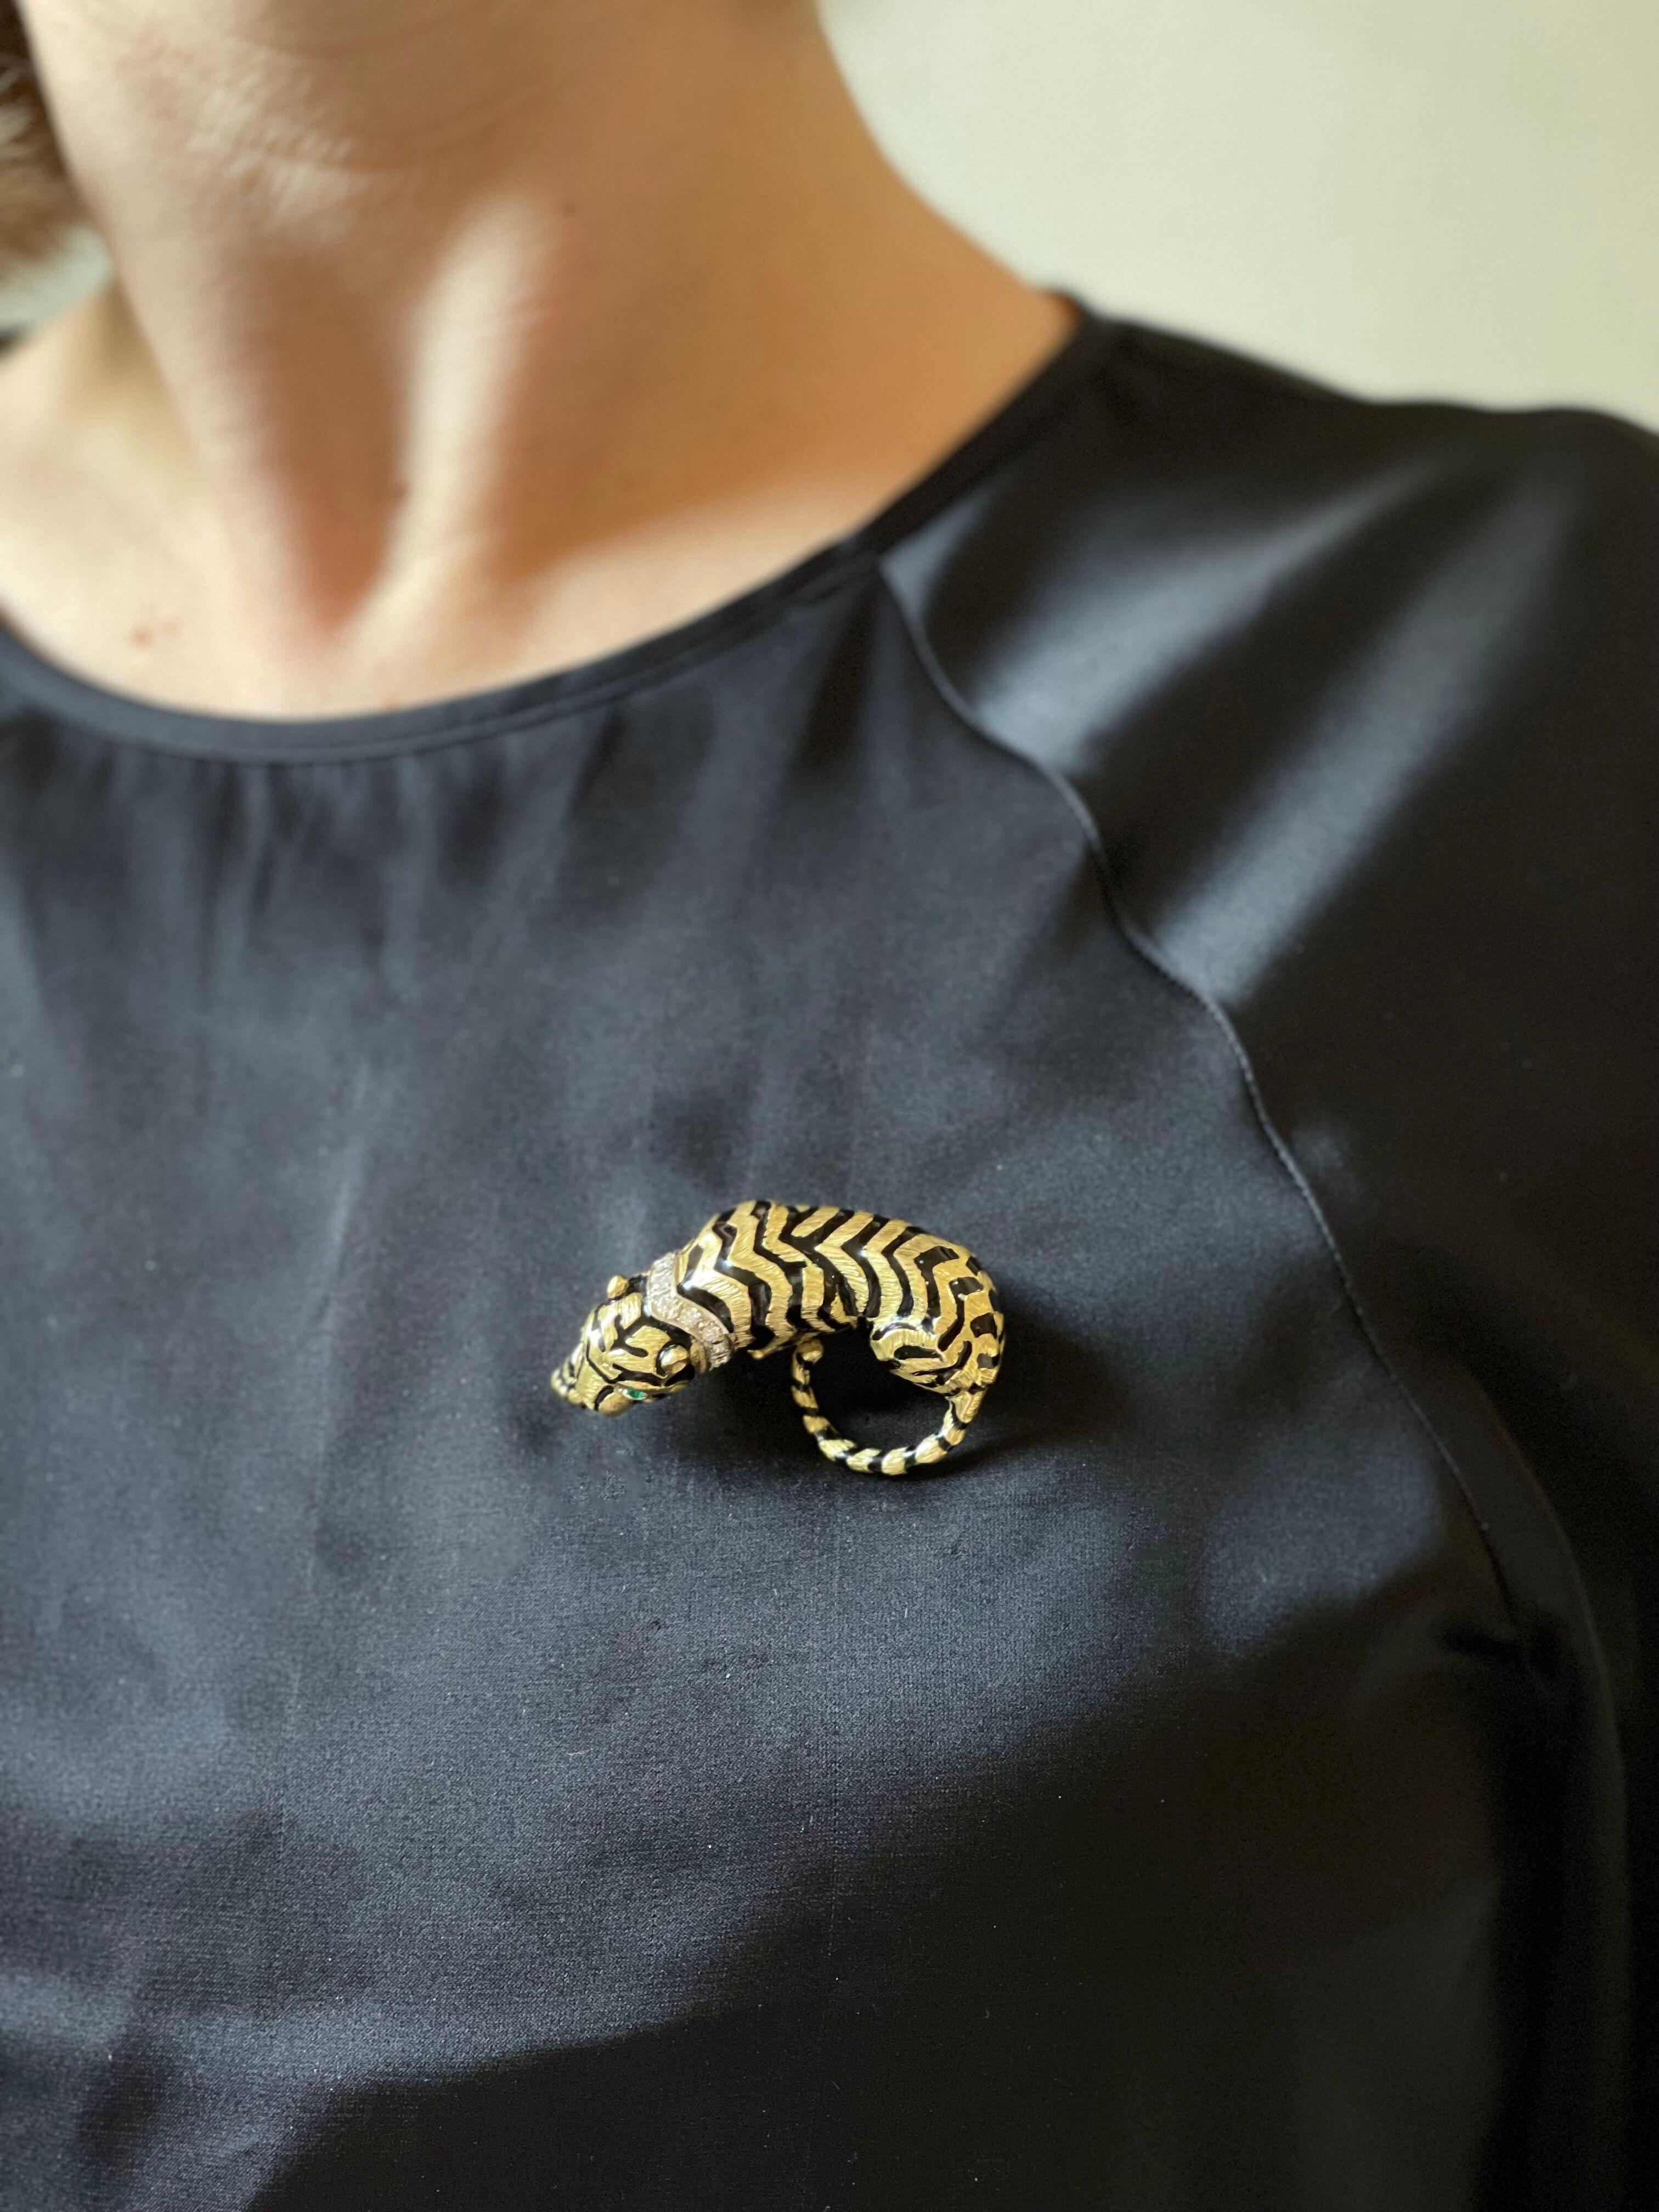 18k gold and enamel crouching tiger brooch, adorned with emerald eyes and approx. 0.45ctw diamonds on the collar. Brooch measures 2 1/8